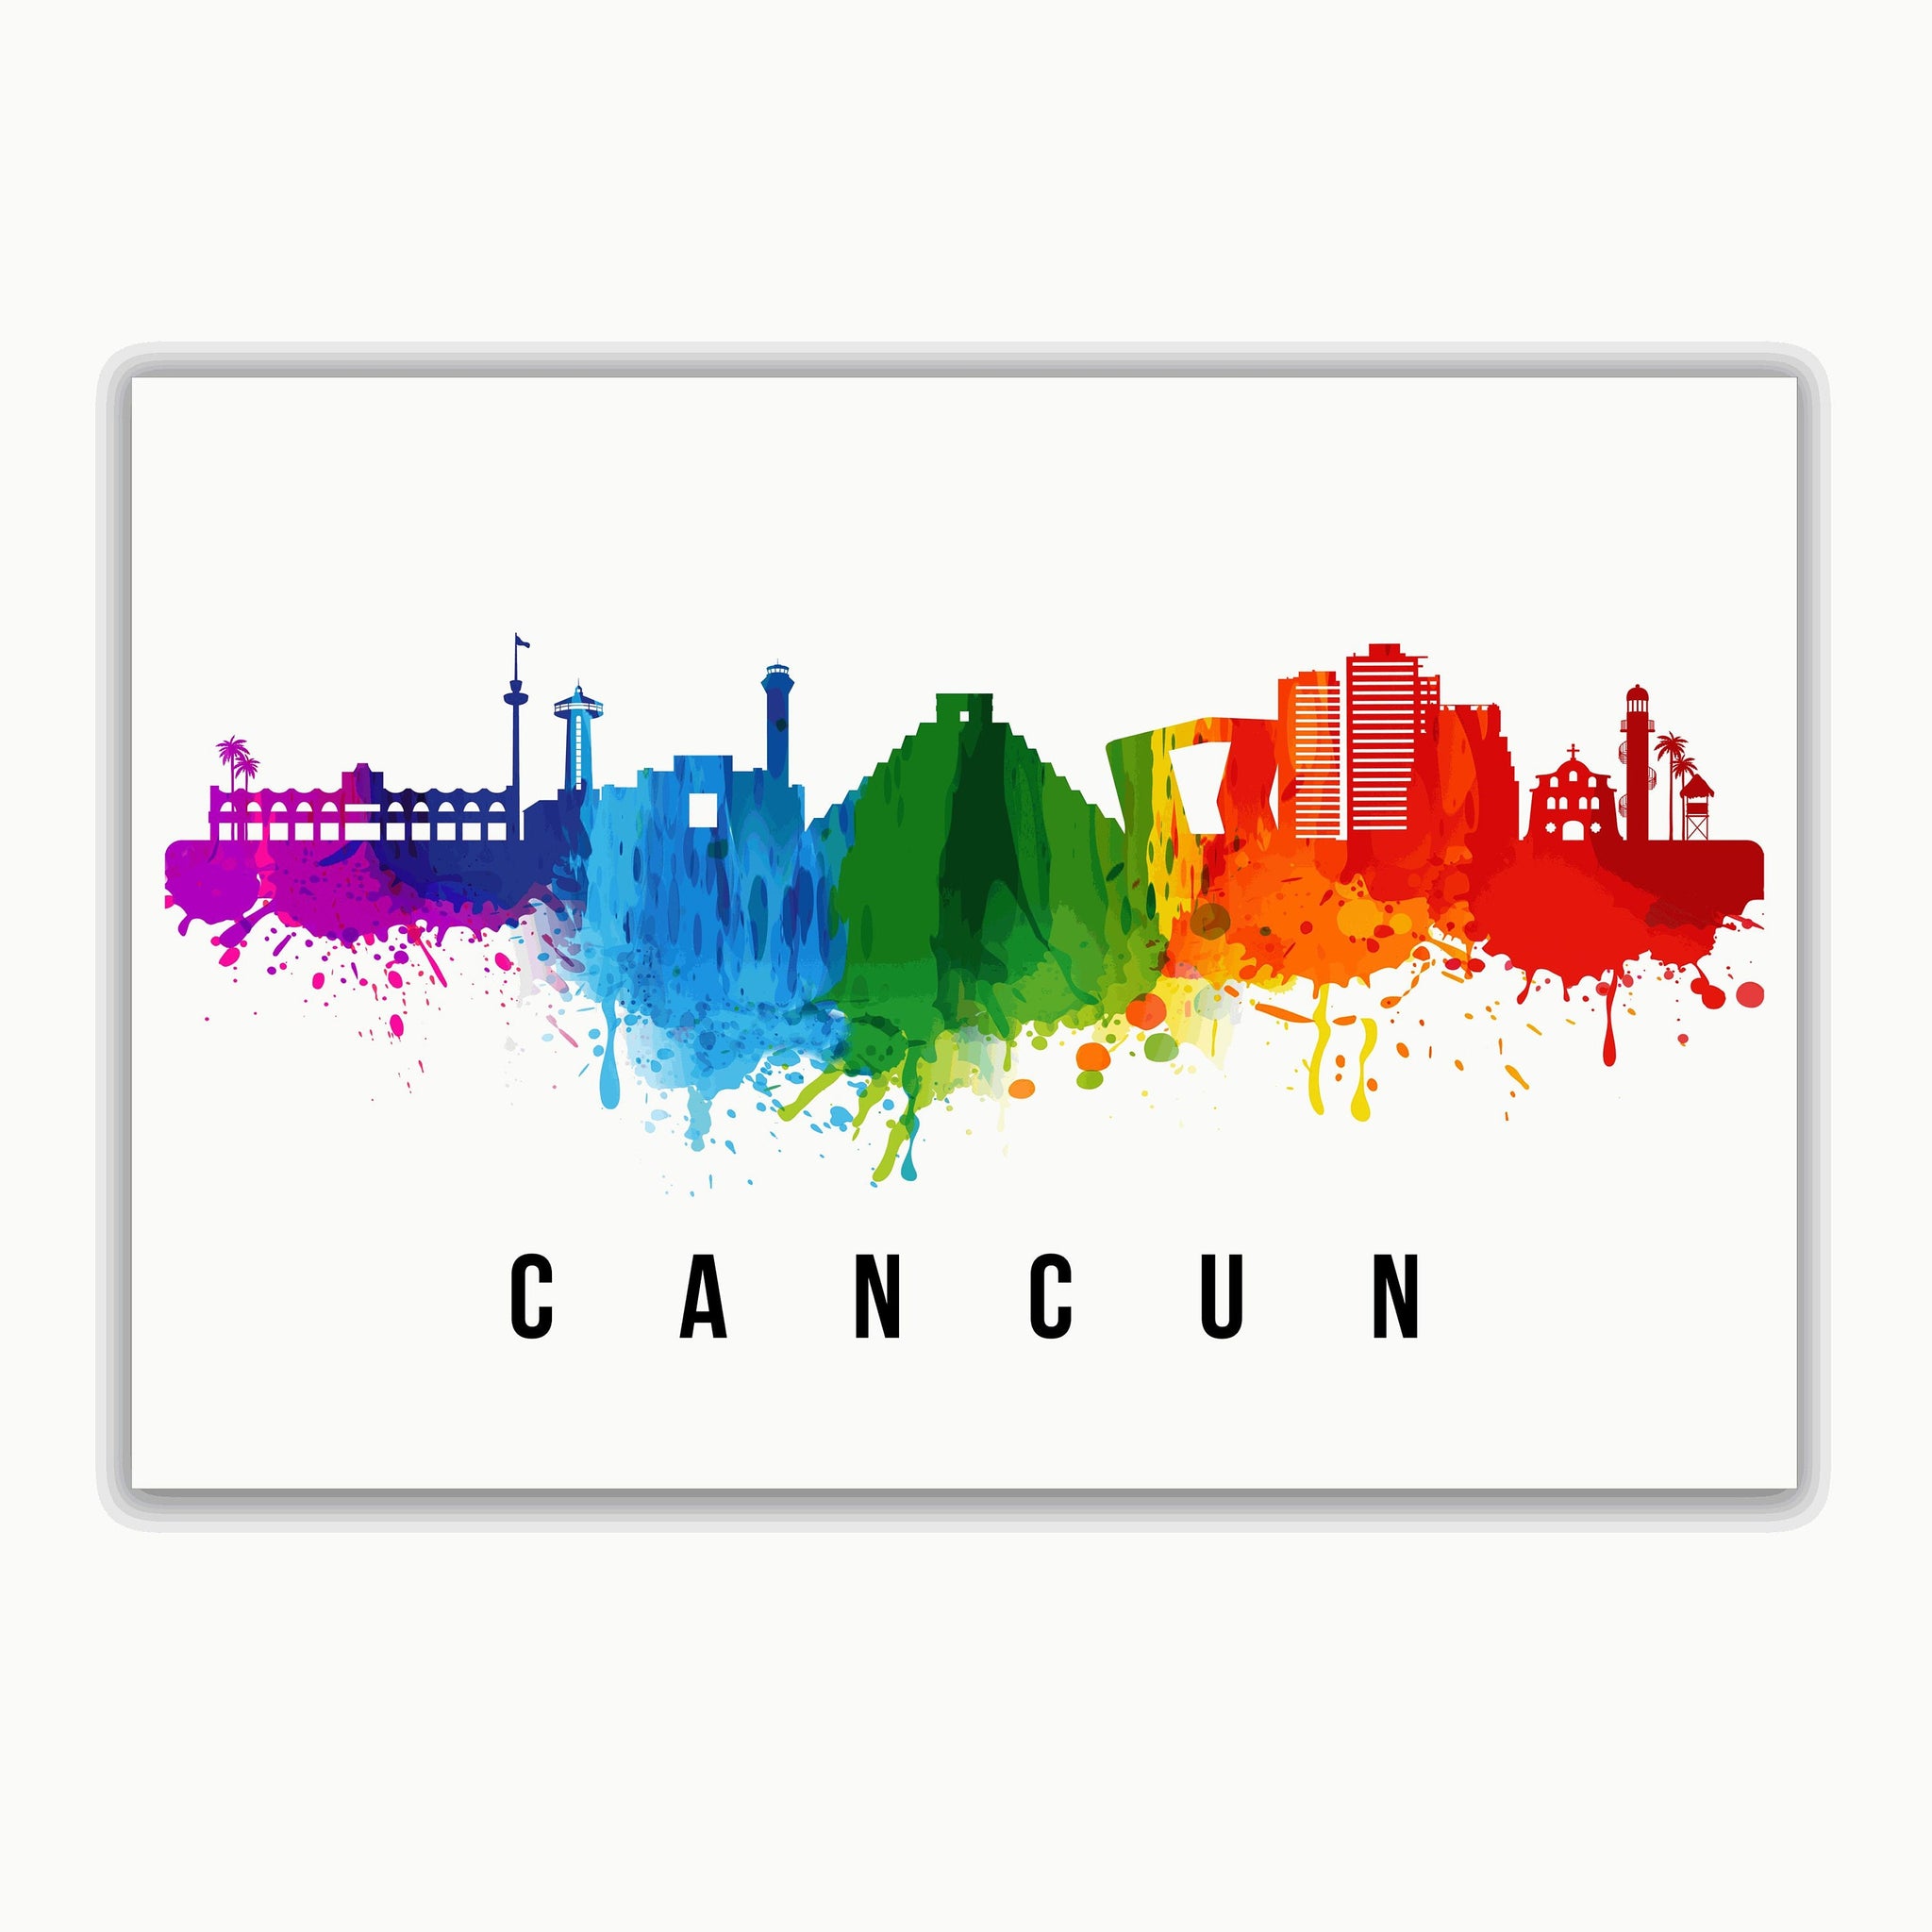 CANCUN - MEXICO  Poster, Skyline Poster Cityscape and Landmark Cancun City Illustration Home Wall Art, Office Decor